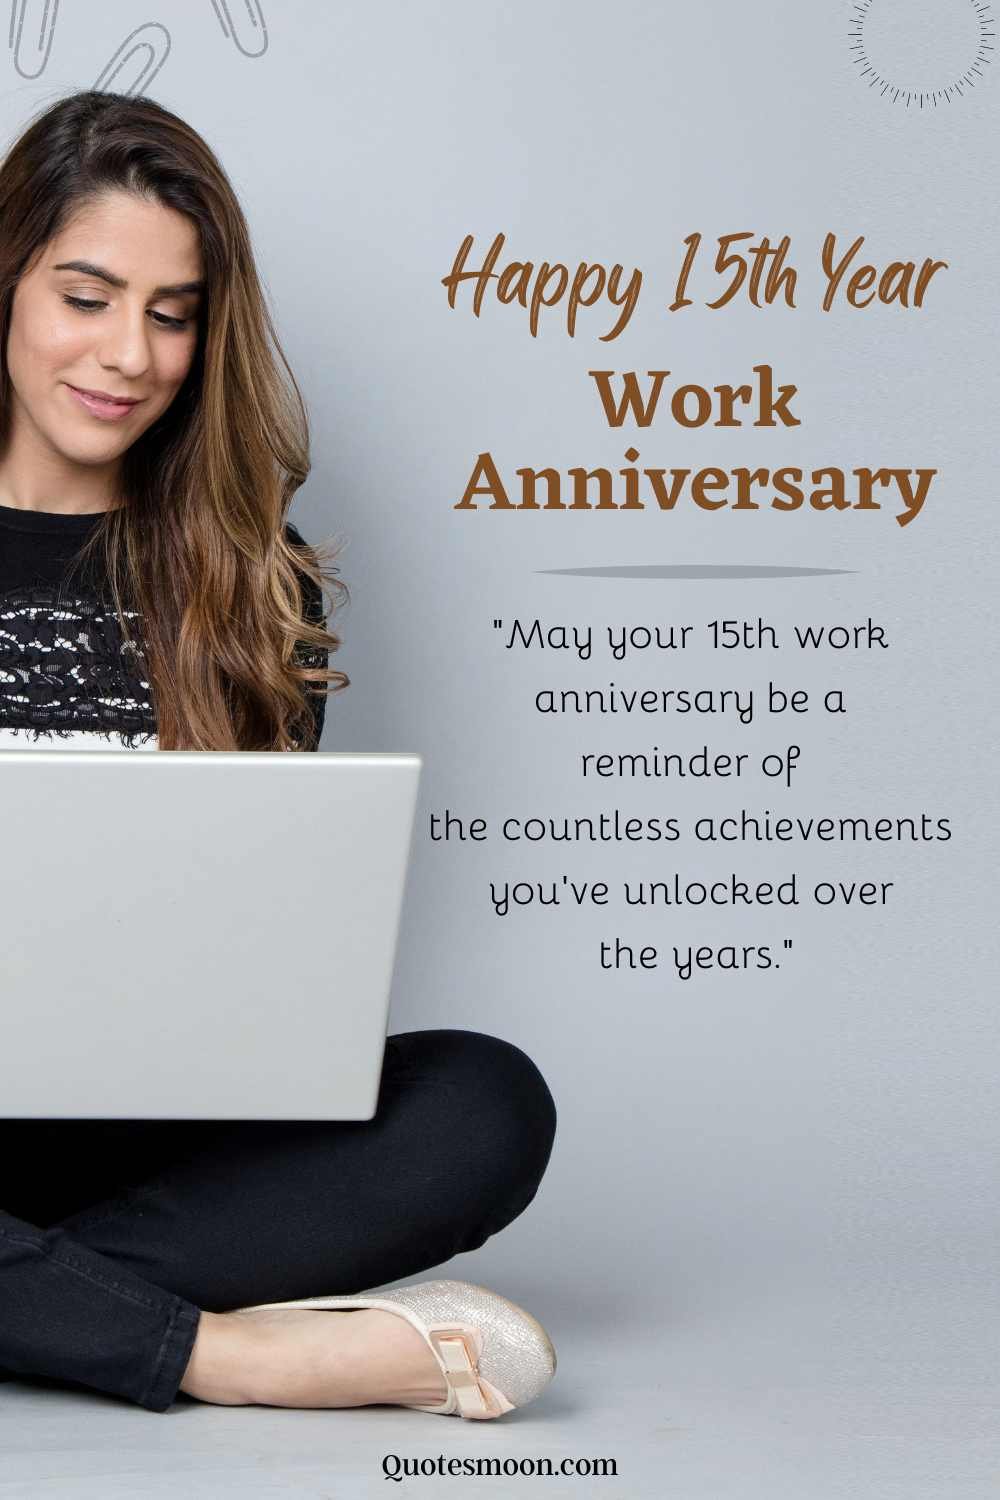 15 year work anniversary speech by employee with images